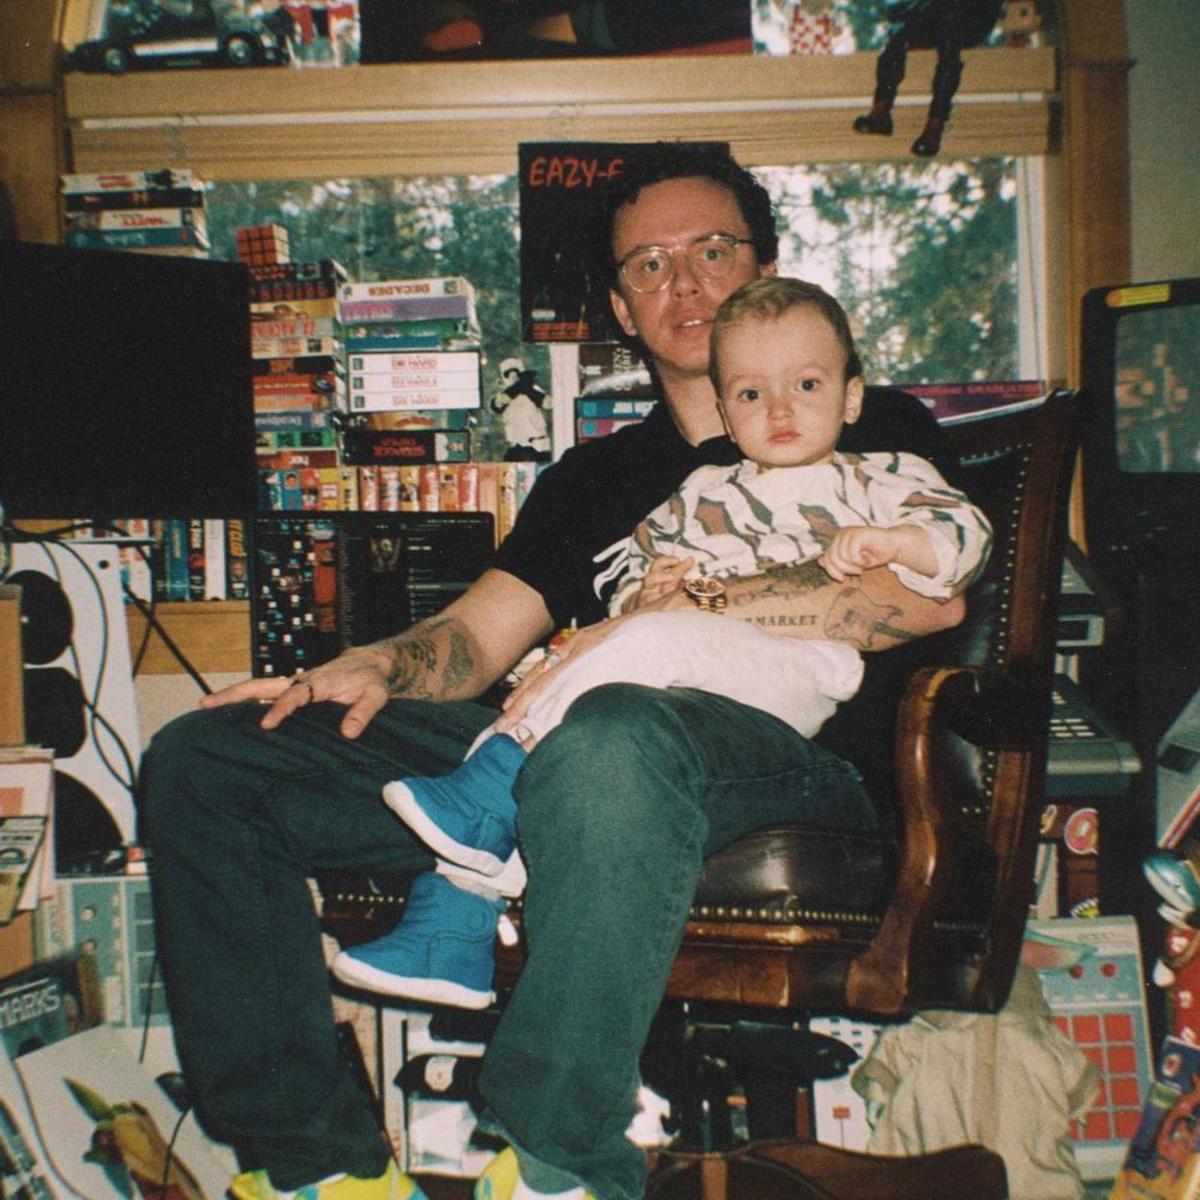 Logic Shares Two New Tracks “Tetris” and “Decades” | Complex